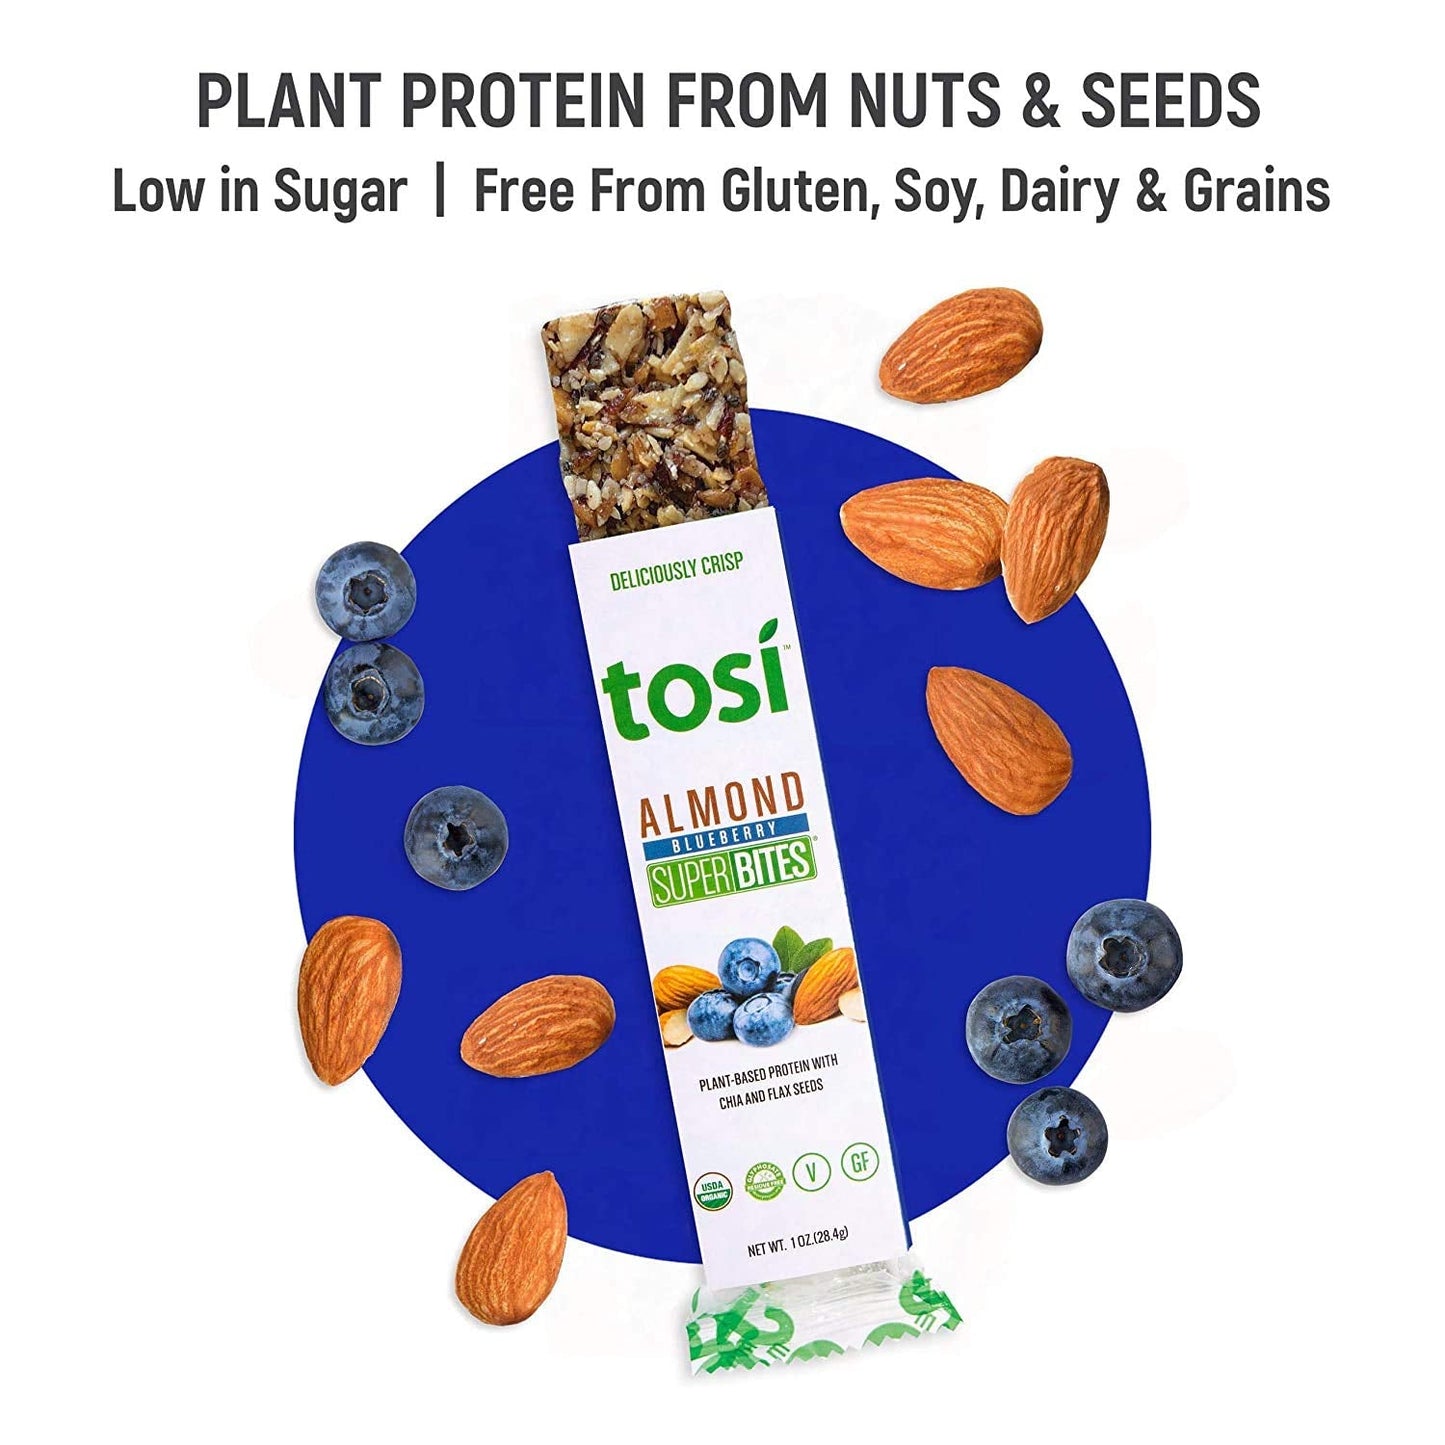 Tosi Organic SuperBites Vegan Snacks, Blueberry Almond, 1 Oz, Pack of 1 - Premium vegan snack from Concordia Style Boutique - Just $4.92! Shop now at Concordia Style Boutique